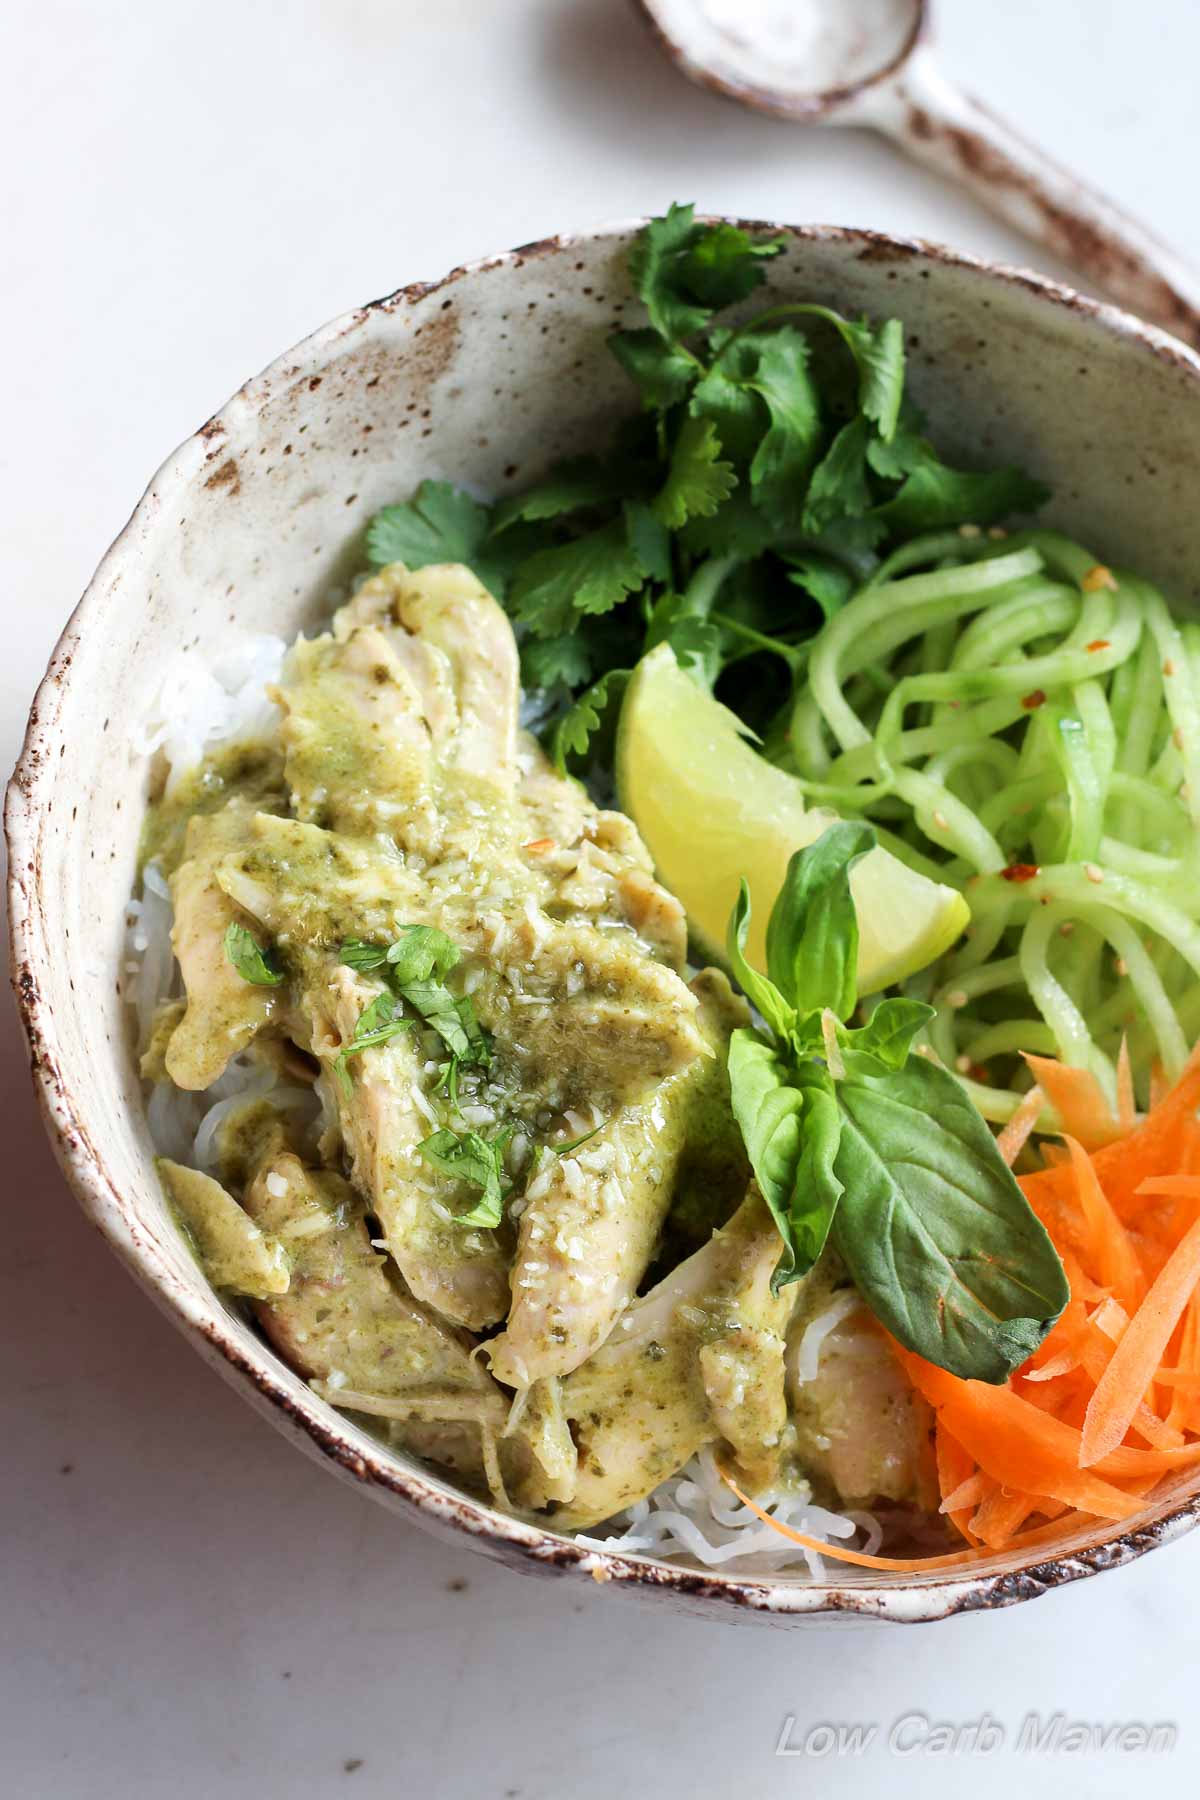 Easy Weeknight Coconut Basil Chicken promises great Thai flavors & a complete meal on the table in 20! | low carb, gluten-free, dairy-free, paleo, thm | LowCarbMaven.com